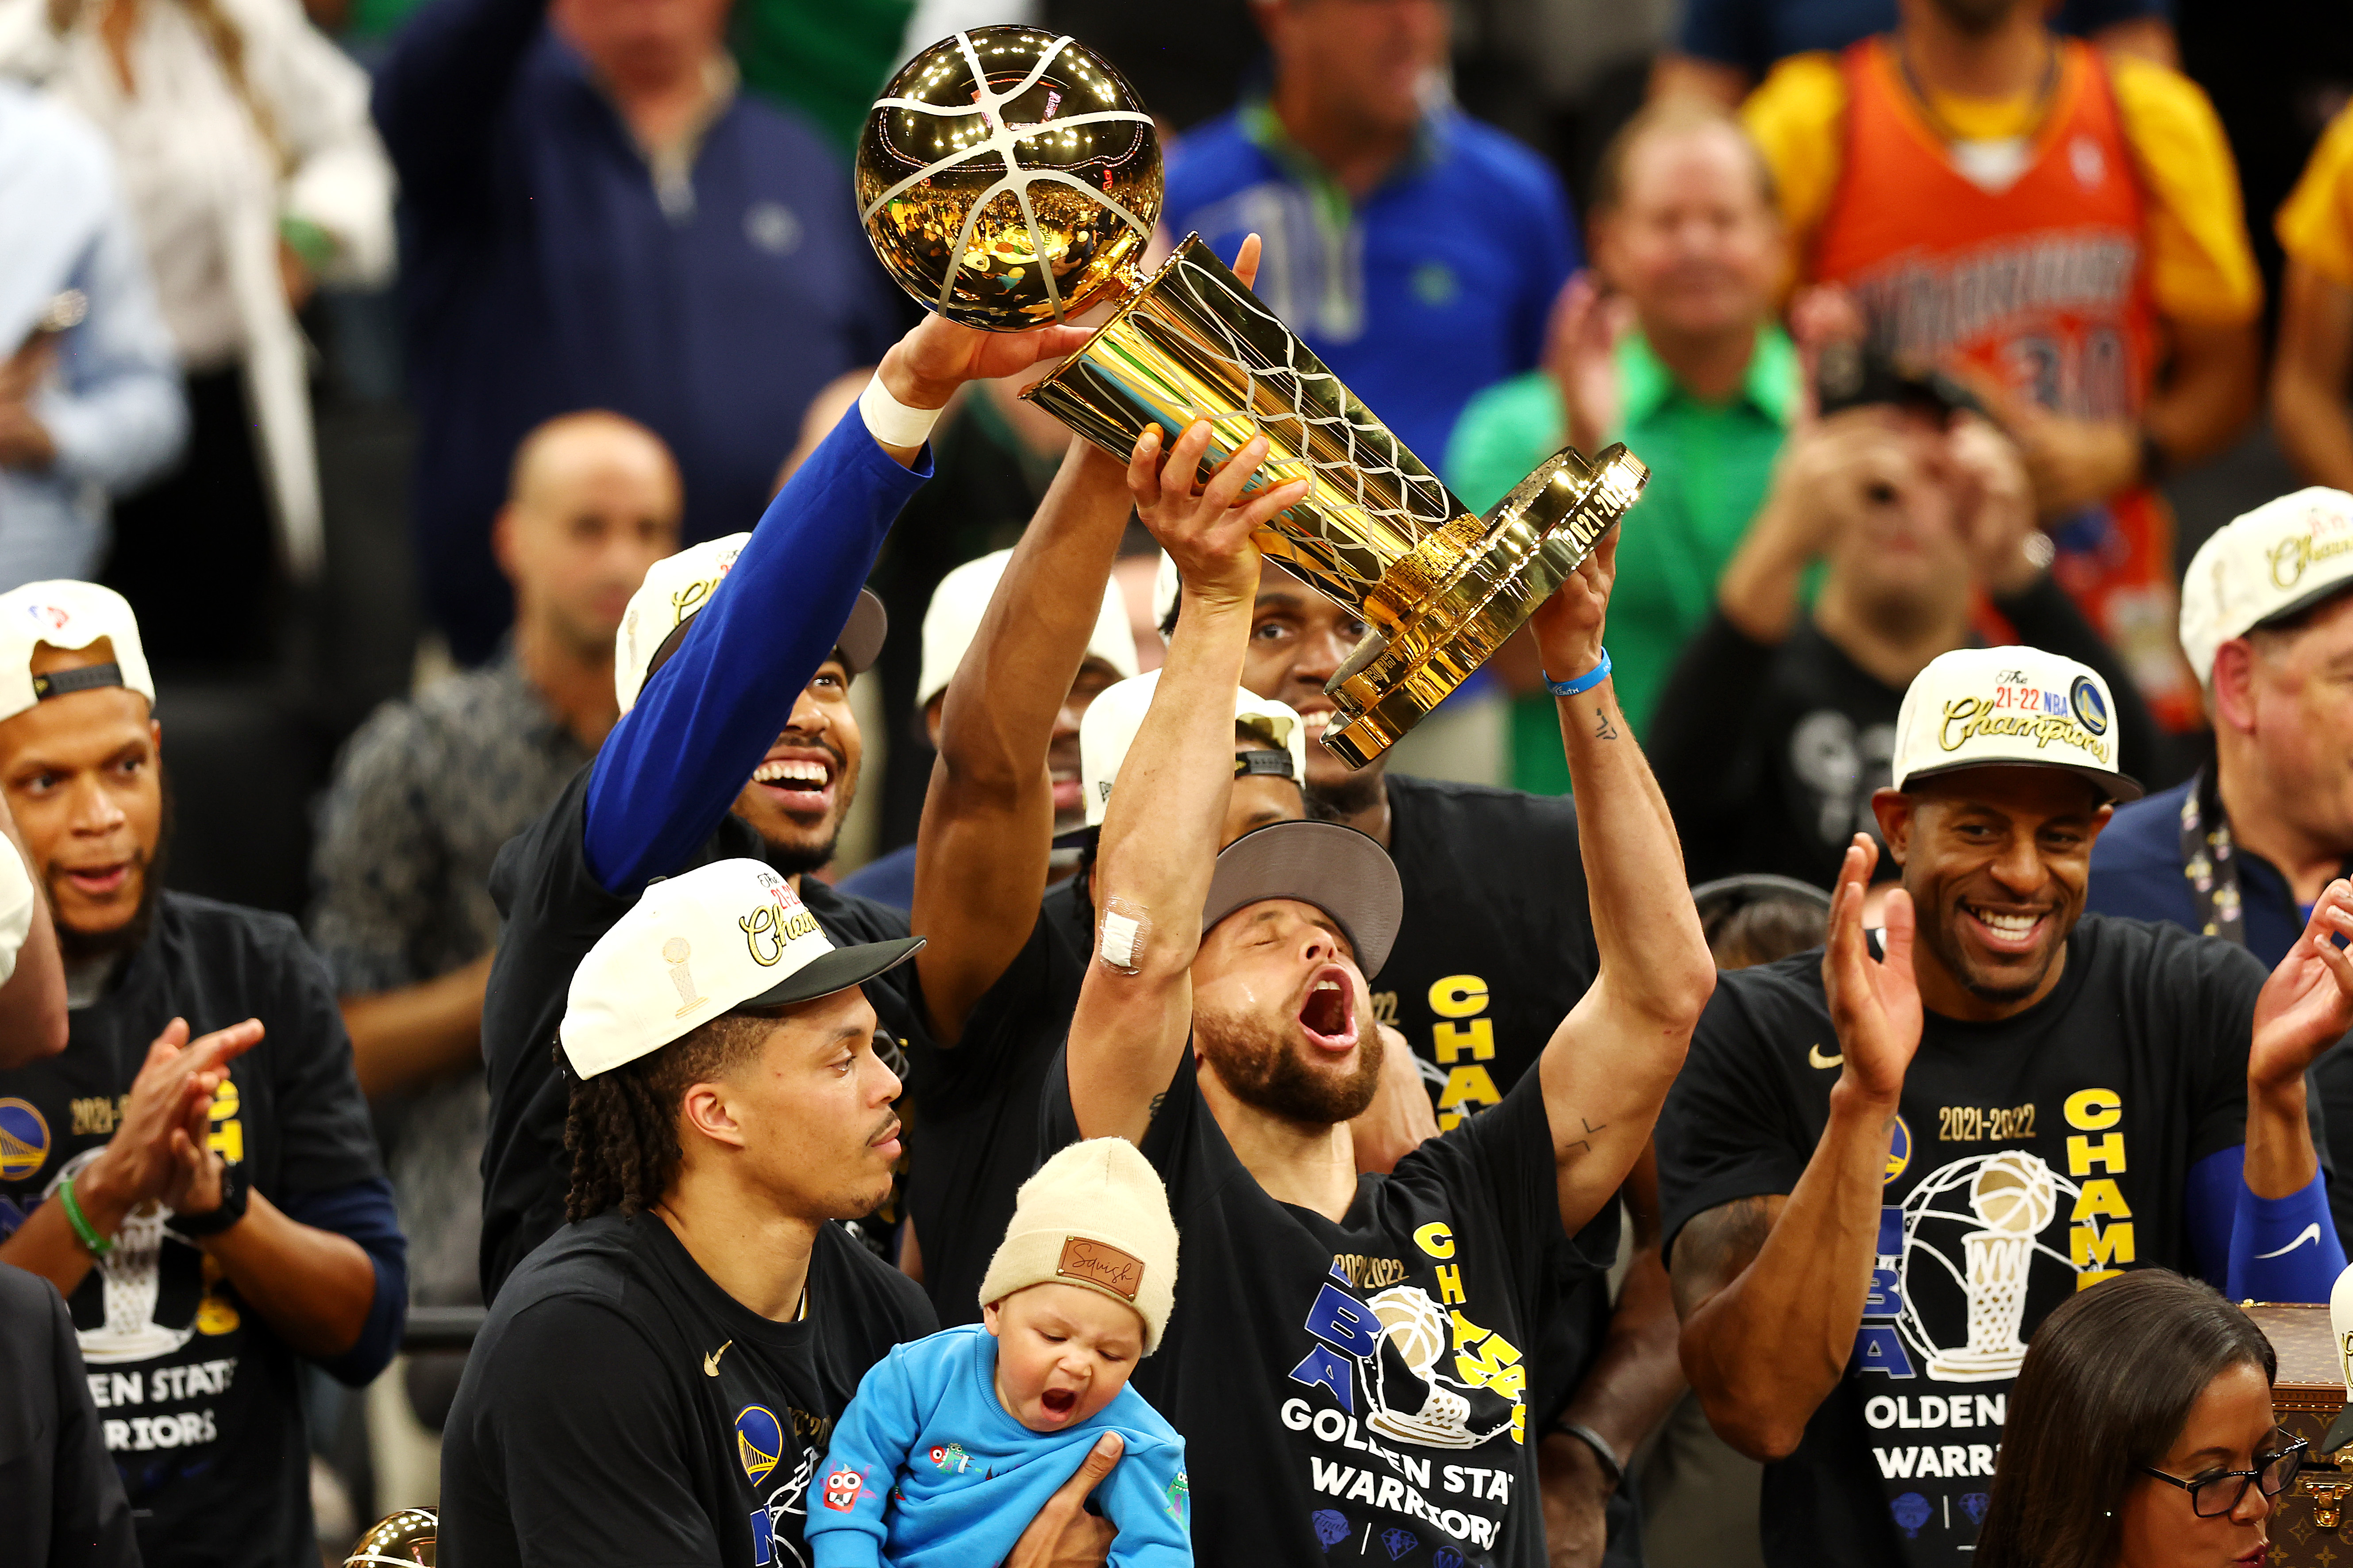 PHOTOS: Warriors Win 4th NBA Title in 8 Years